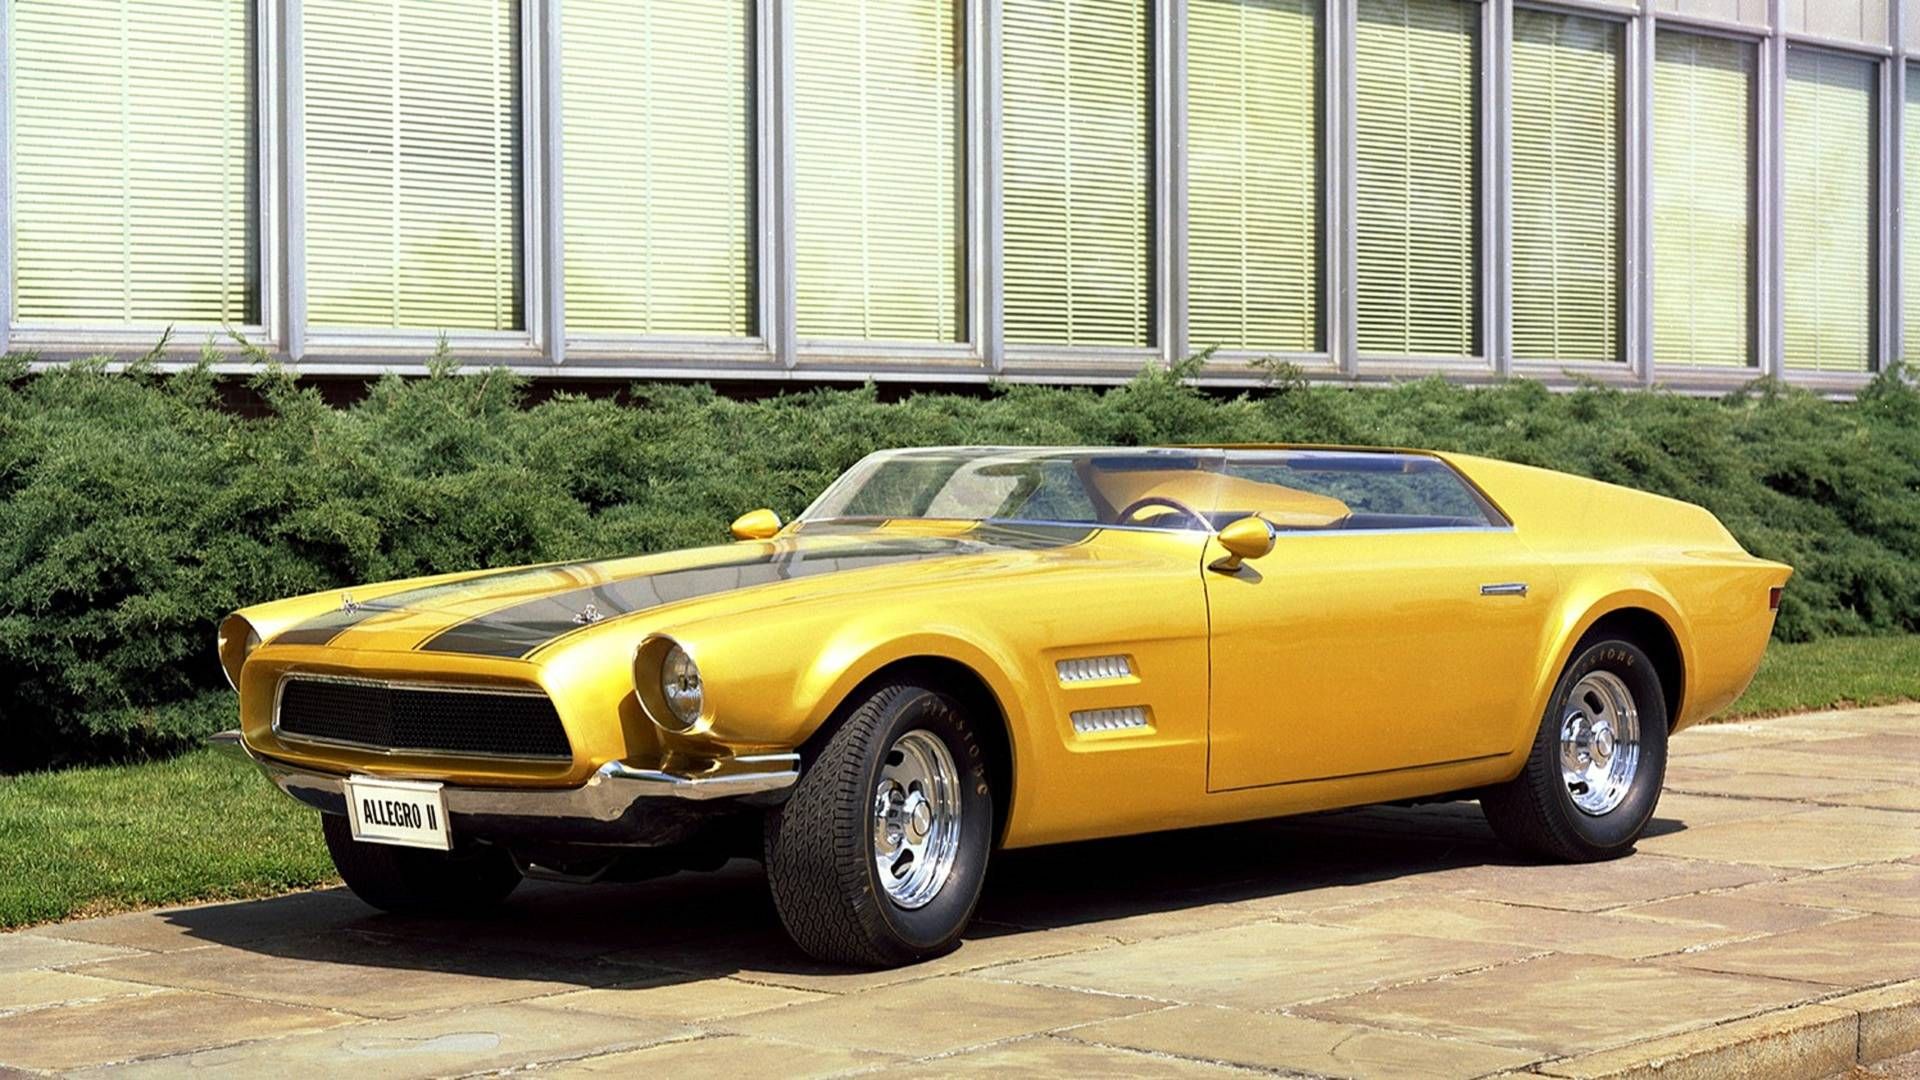 a yellow 1967 Ford Allegro II Concept